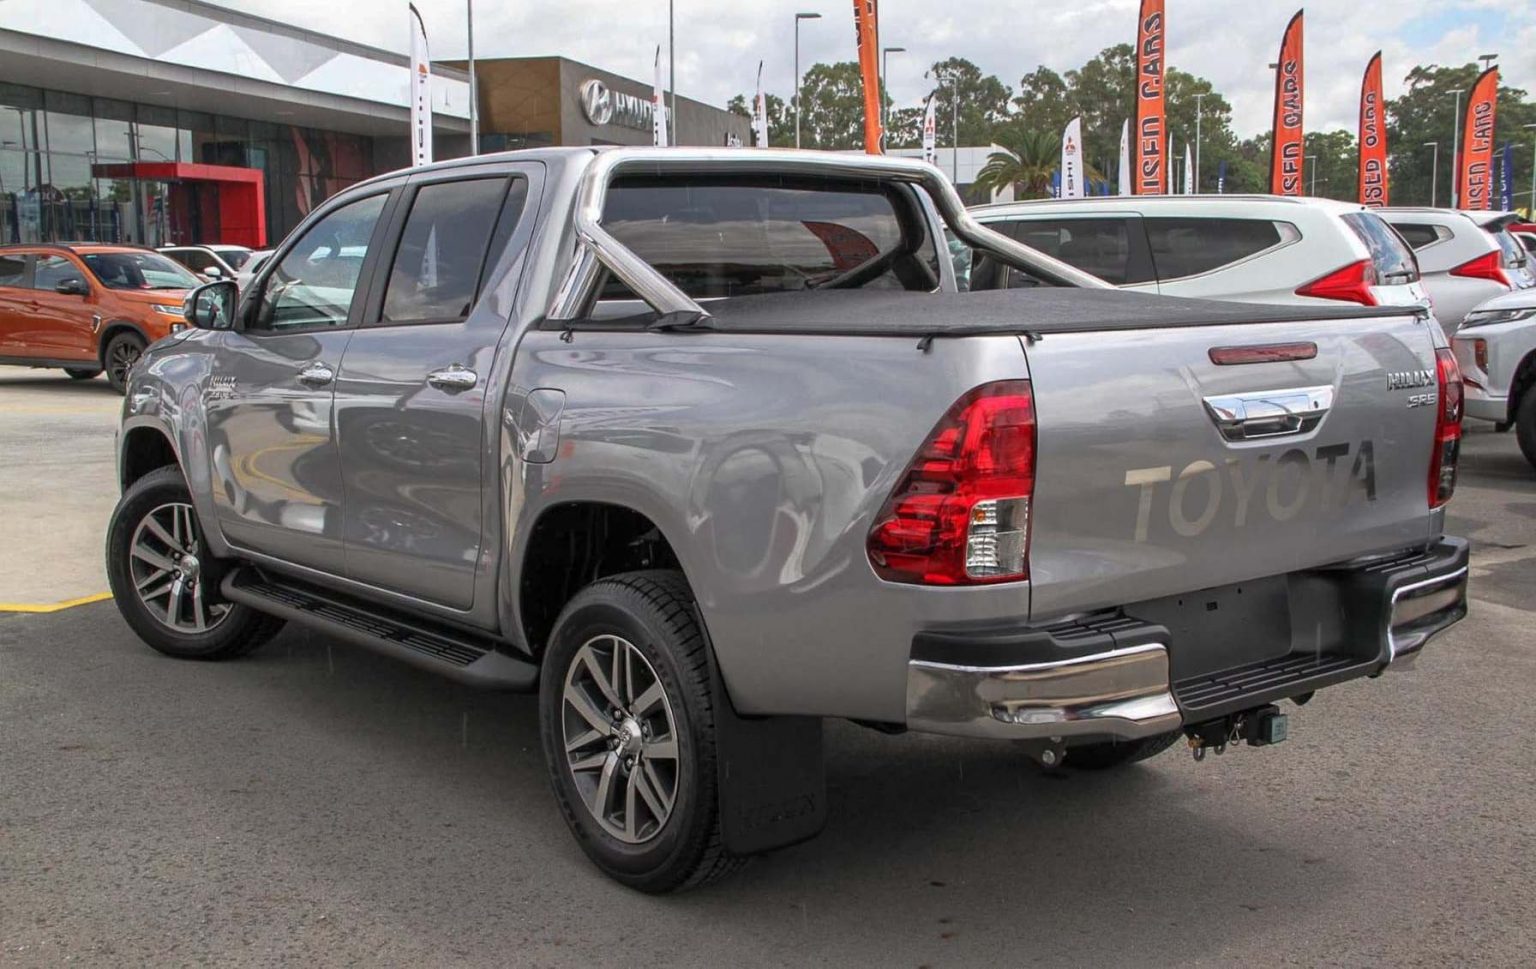 2019 Toyota Hilux Silver Auto 4WD - Commercial Trucks For Sale ...